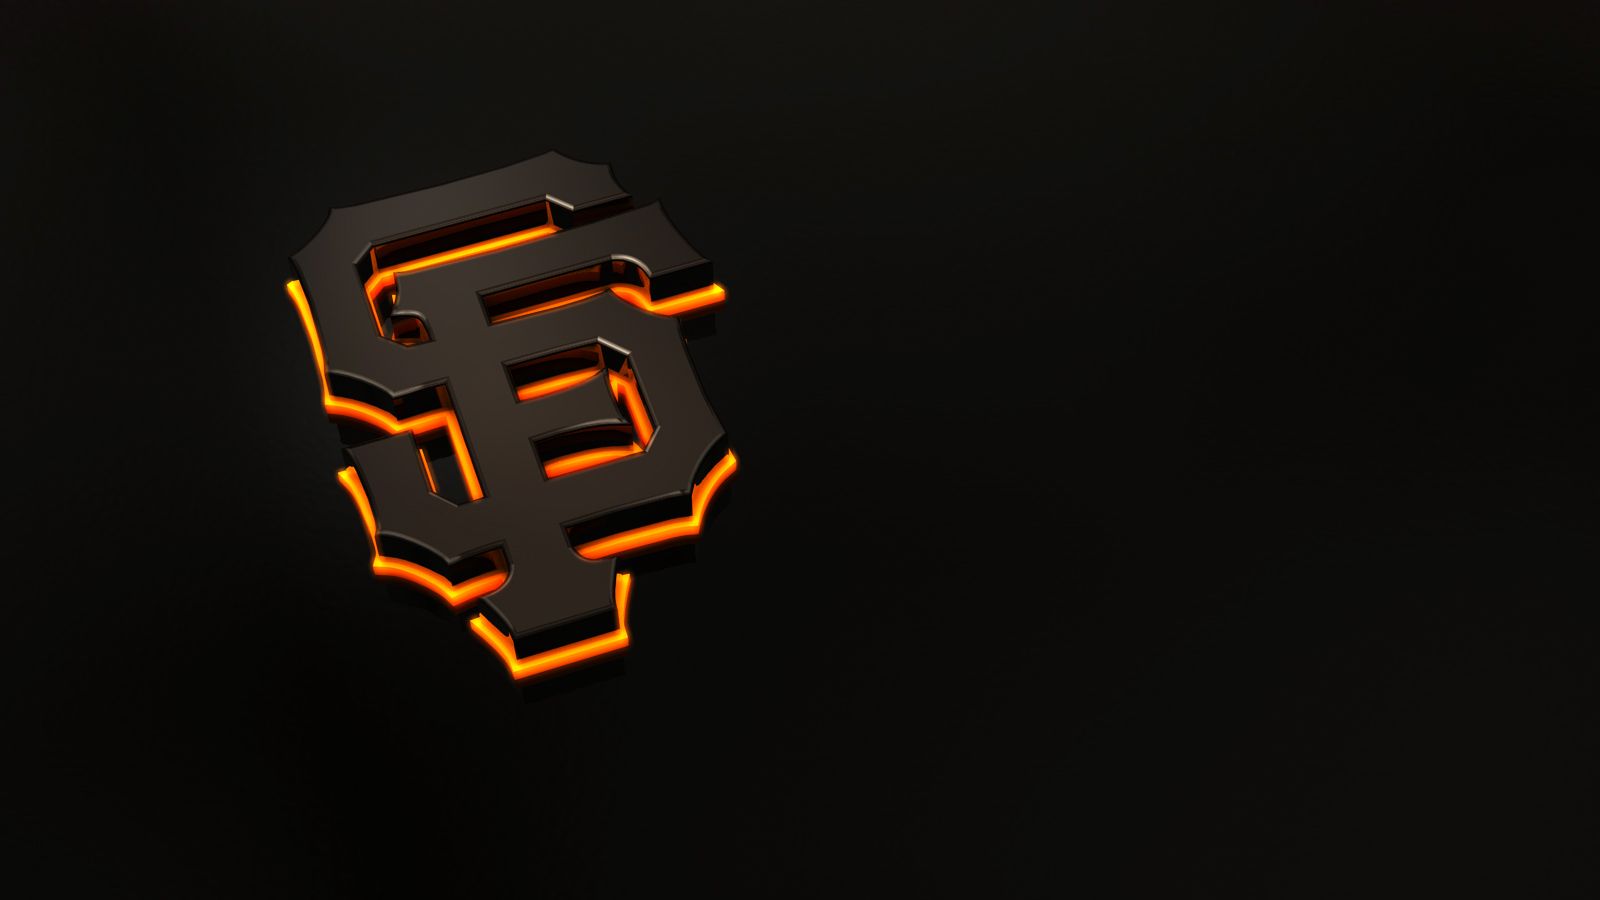 4 San Francisco Giants HD Wallpapers | Backgrounds - Wallpaper Abyss